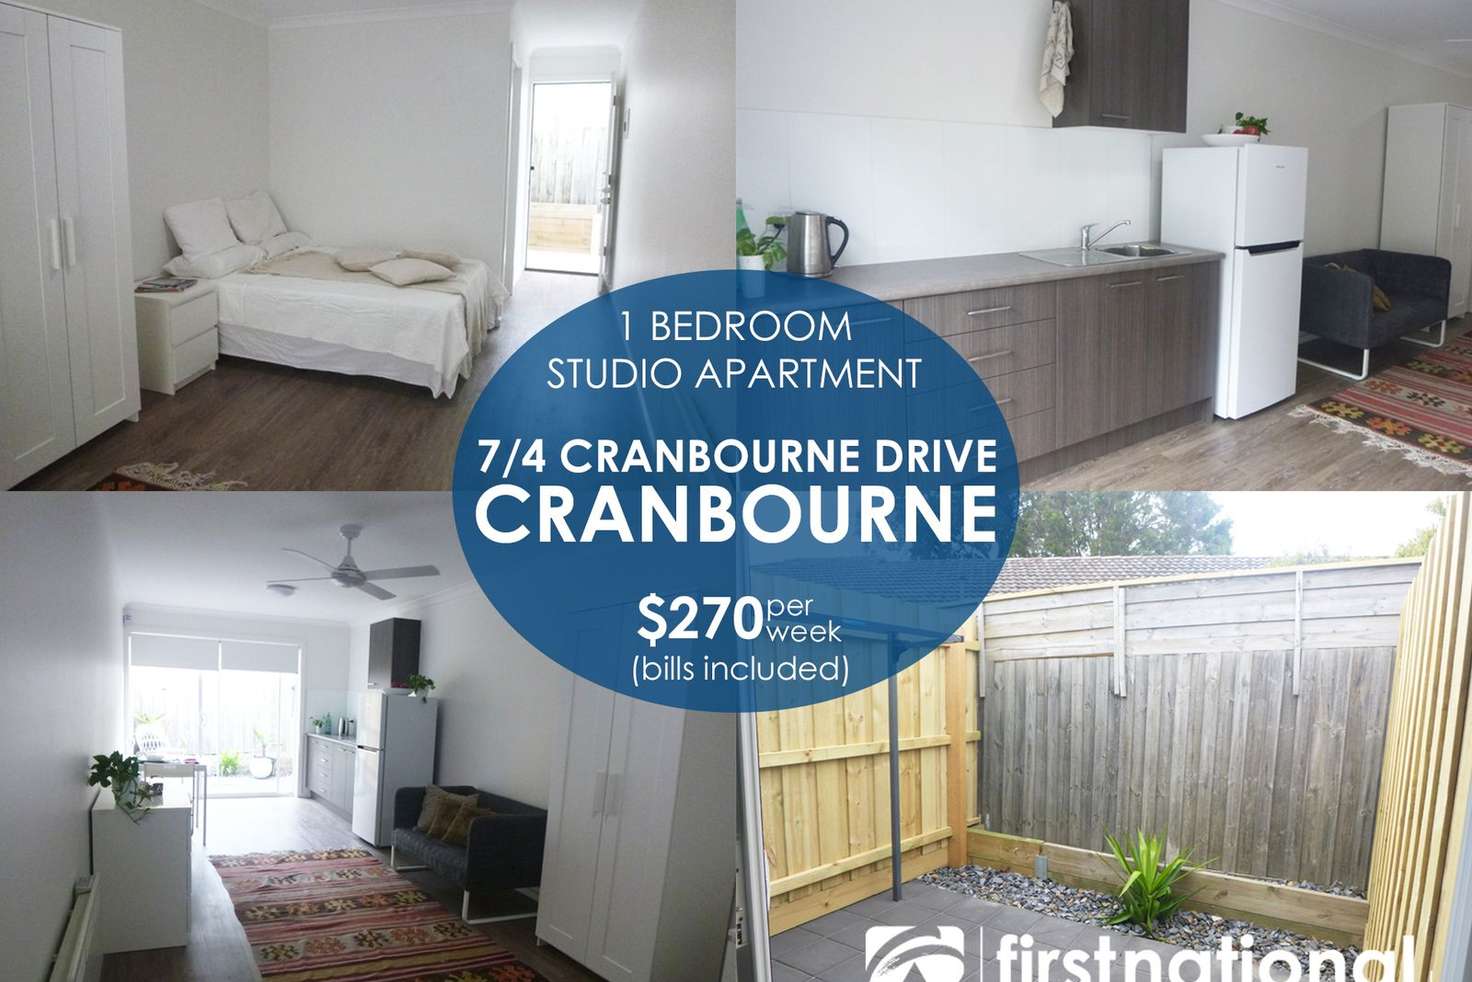 Main view of Homely apartment listing, 7/4 Cranbourne Drive, Cranbourne VIC 3977